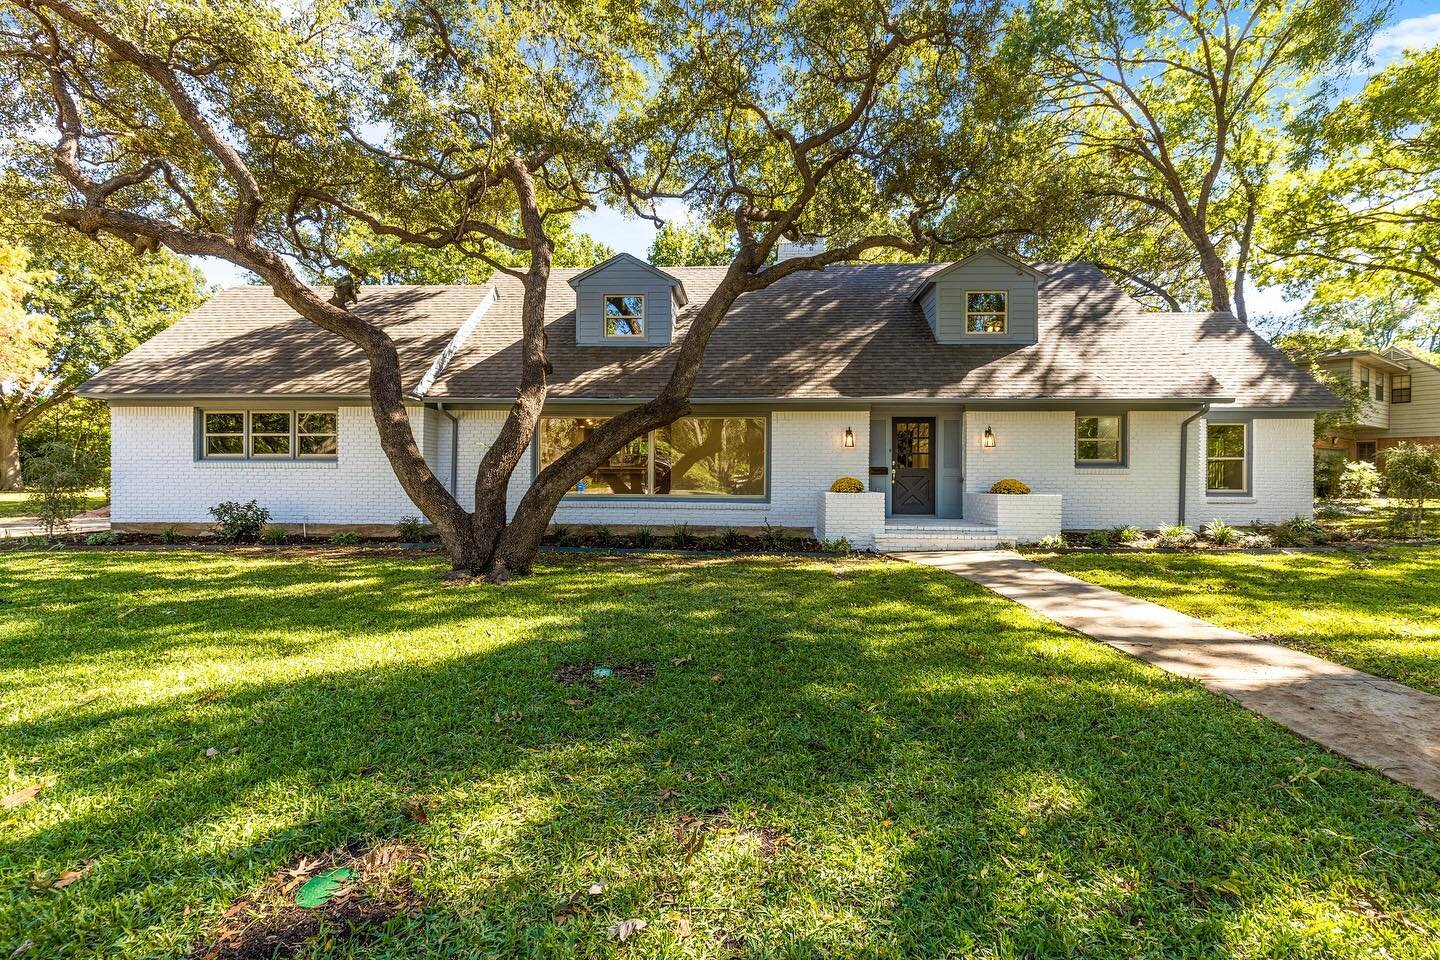 Renovated in 2022, this Midway Hollow gem is on the market for under $1M

Refinished hardwood floors flow seamlessly room to room, connecting the kitchen, living areas, and dining areas effortlessly. The kitchen creates a modern aesthetic with Quartz